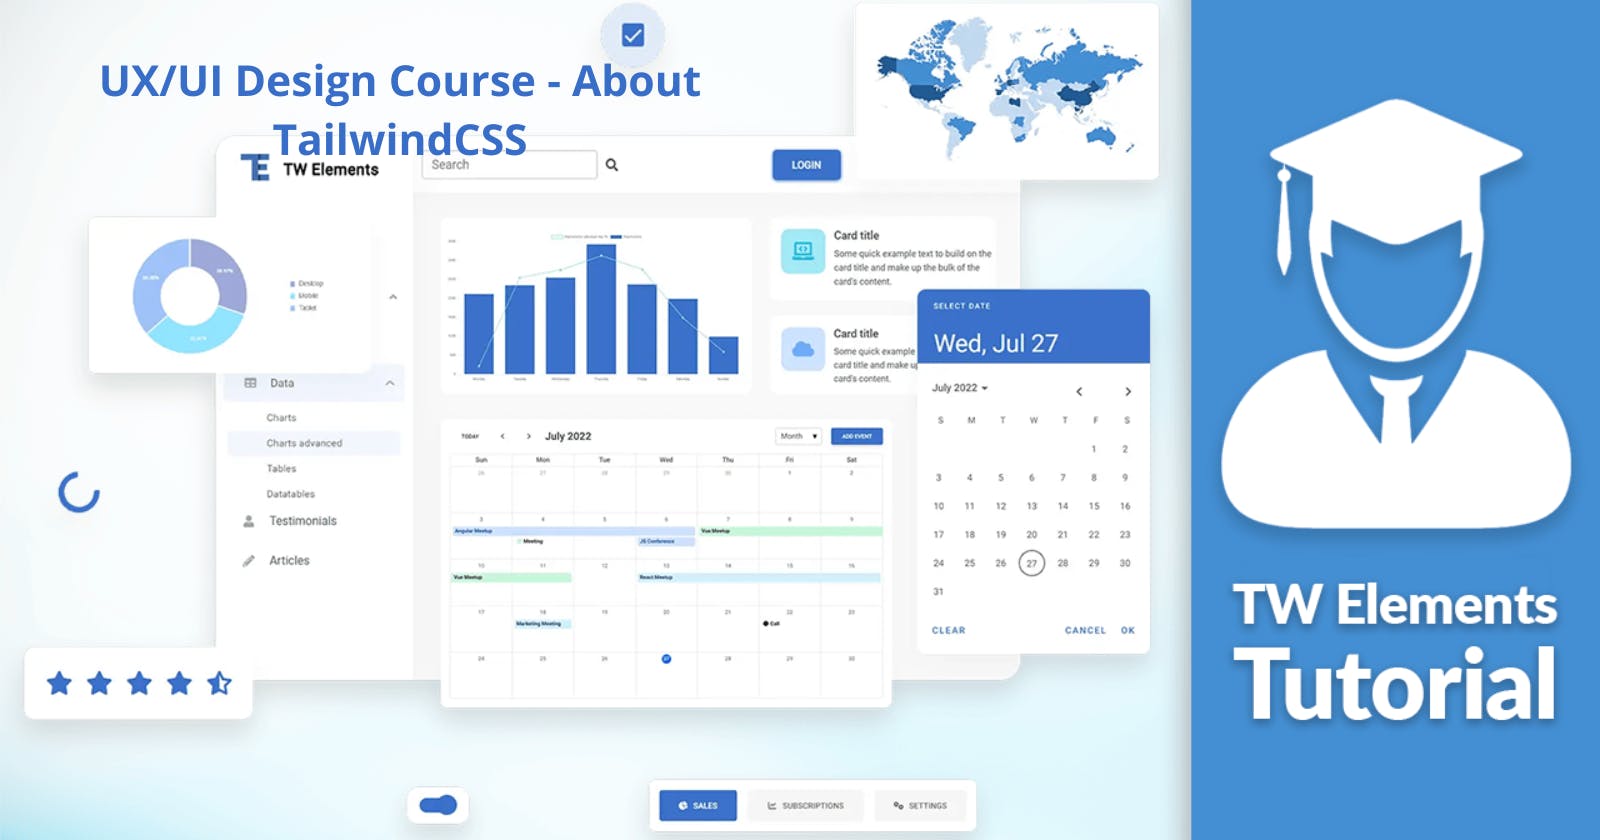 Tailwind CSS UX/UI Design Course - Tailwind CSS versions